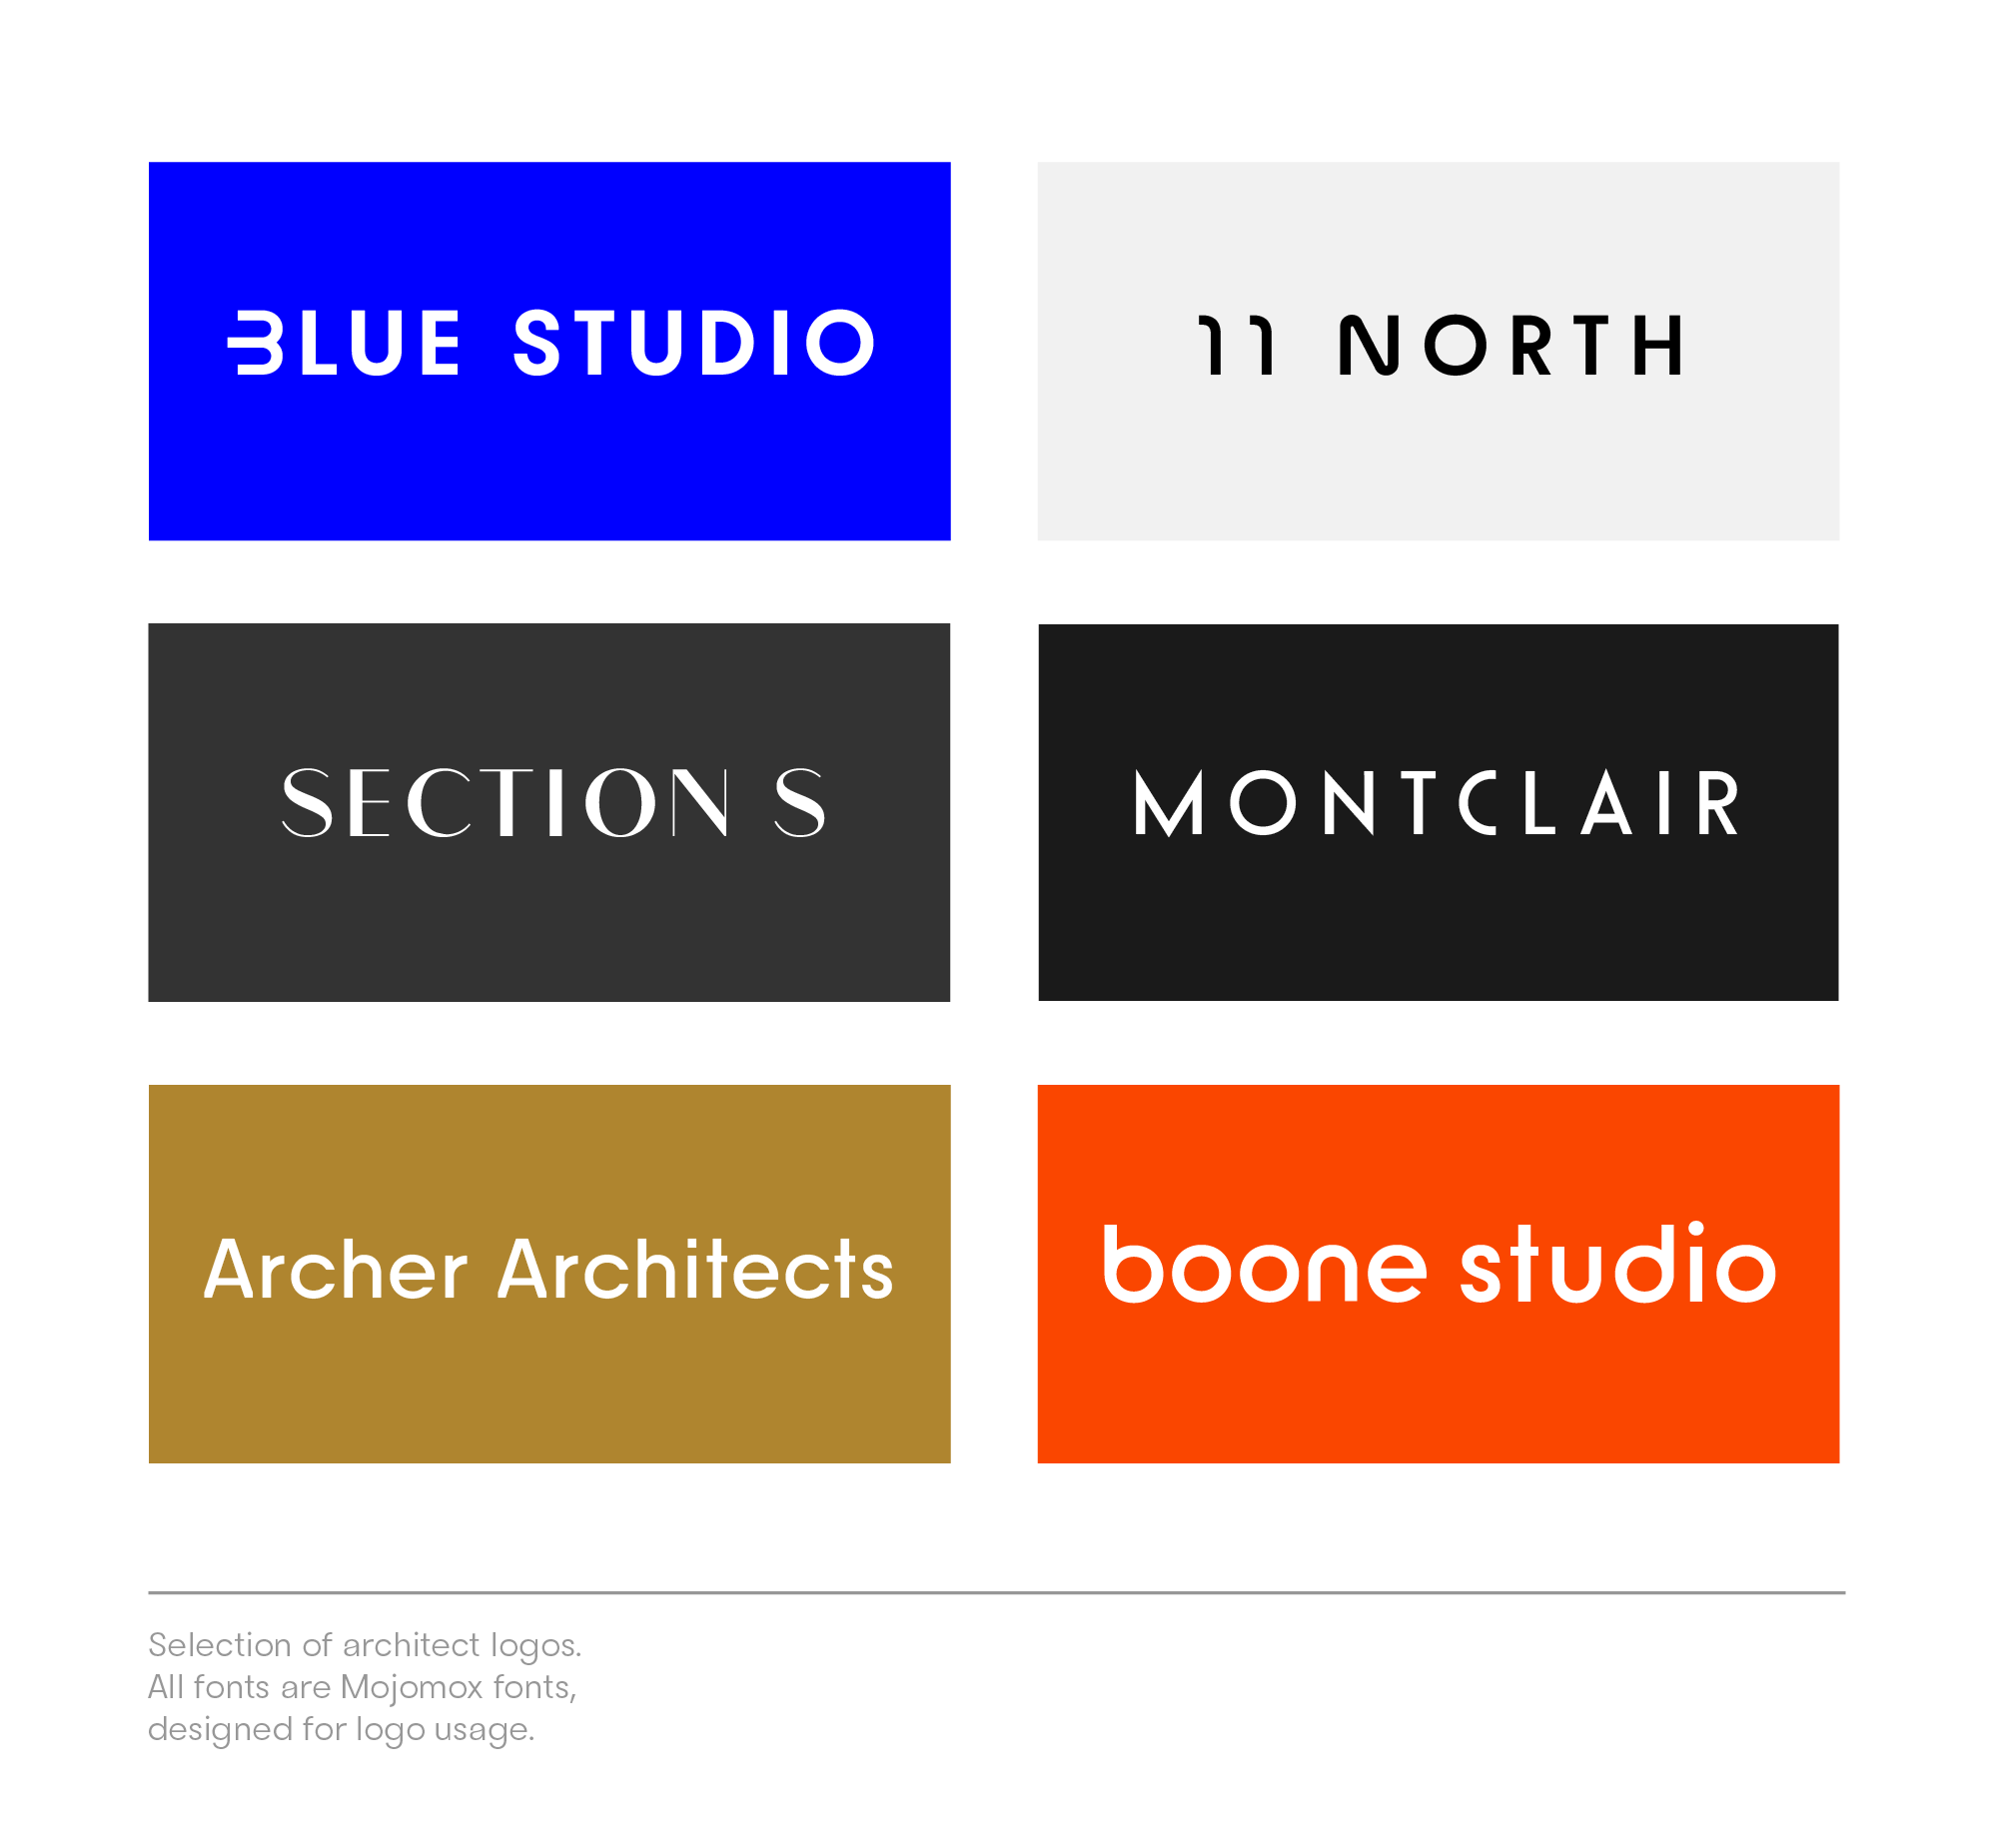 architecture logos are often made from typography